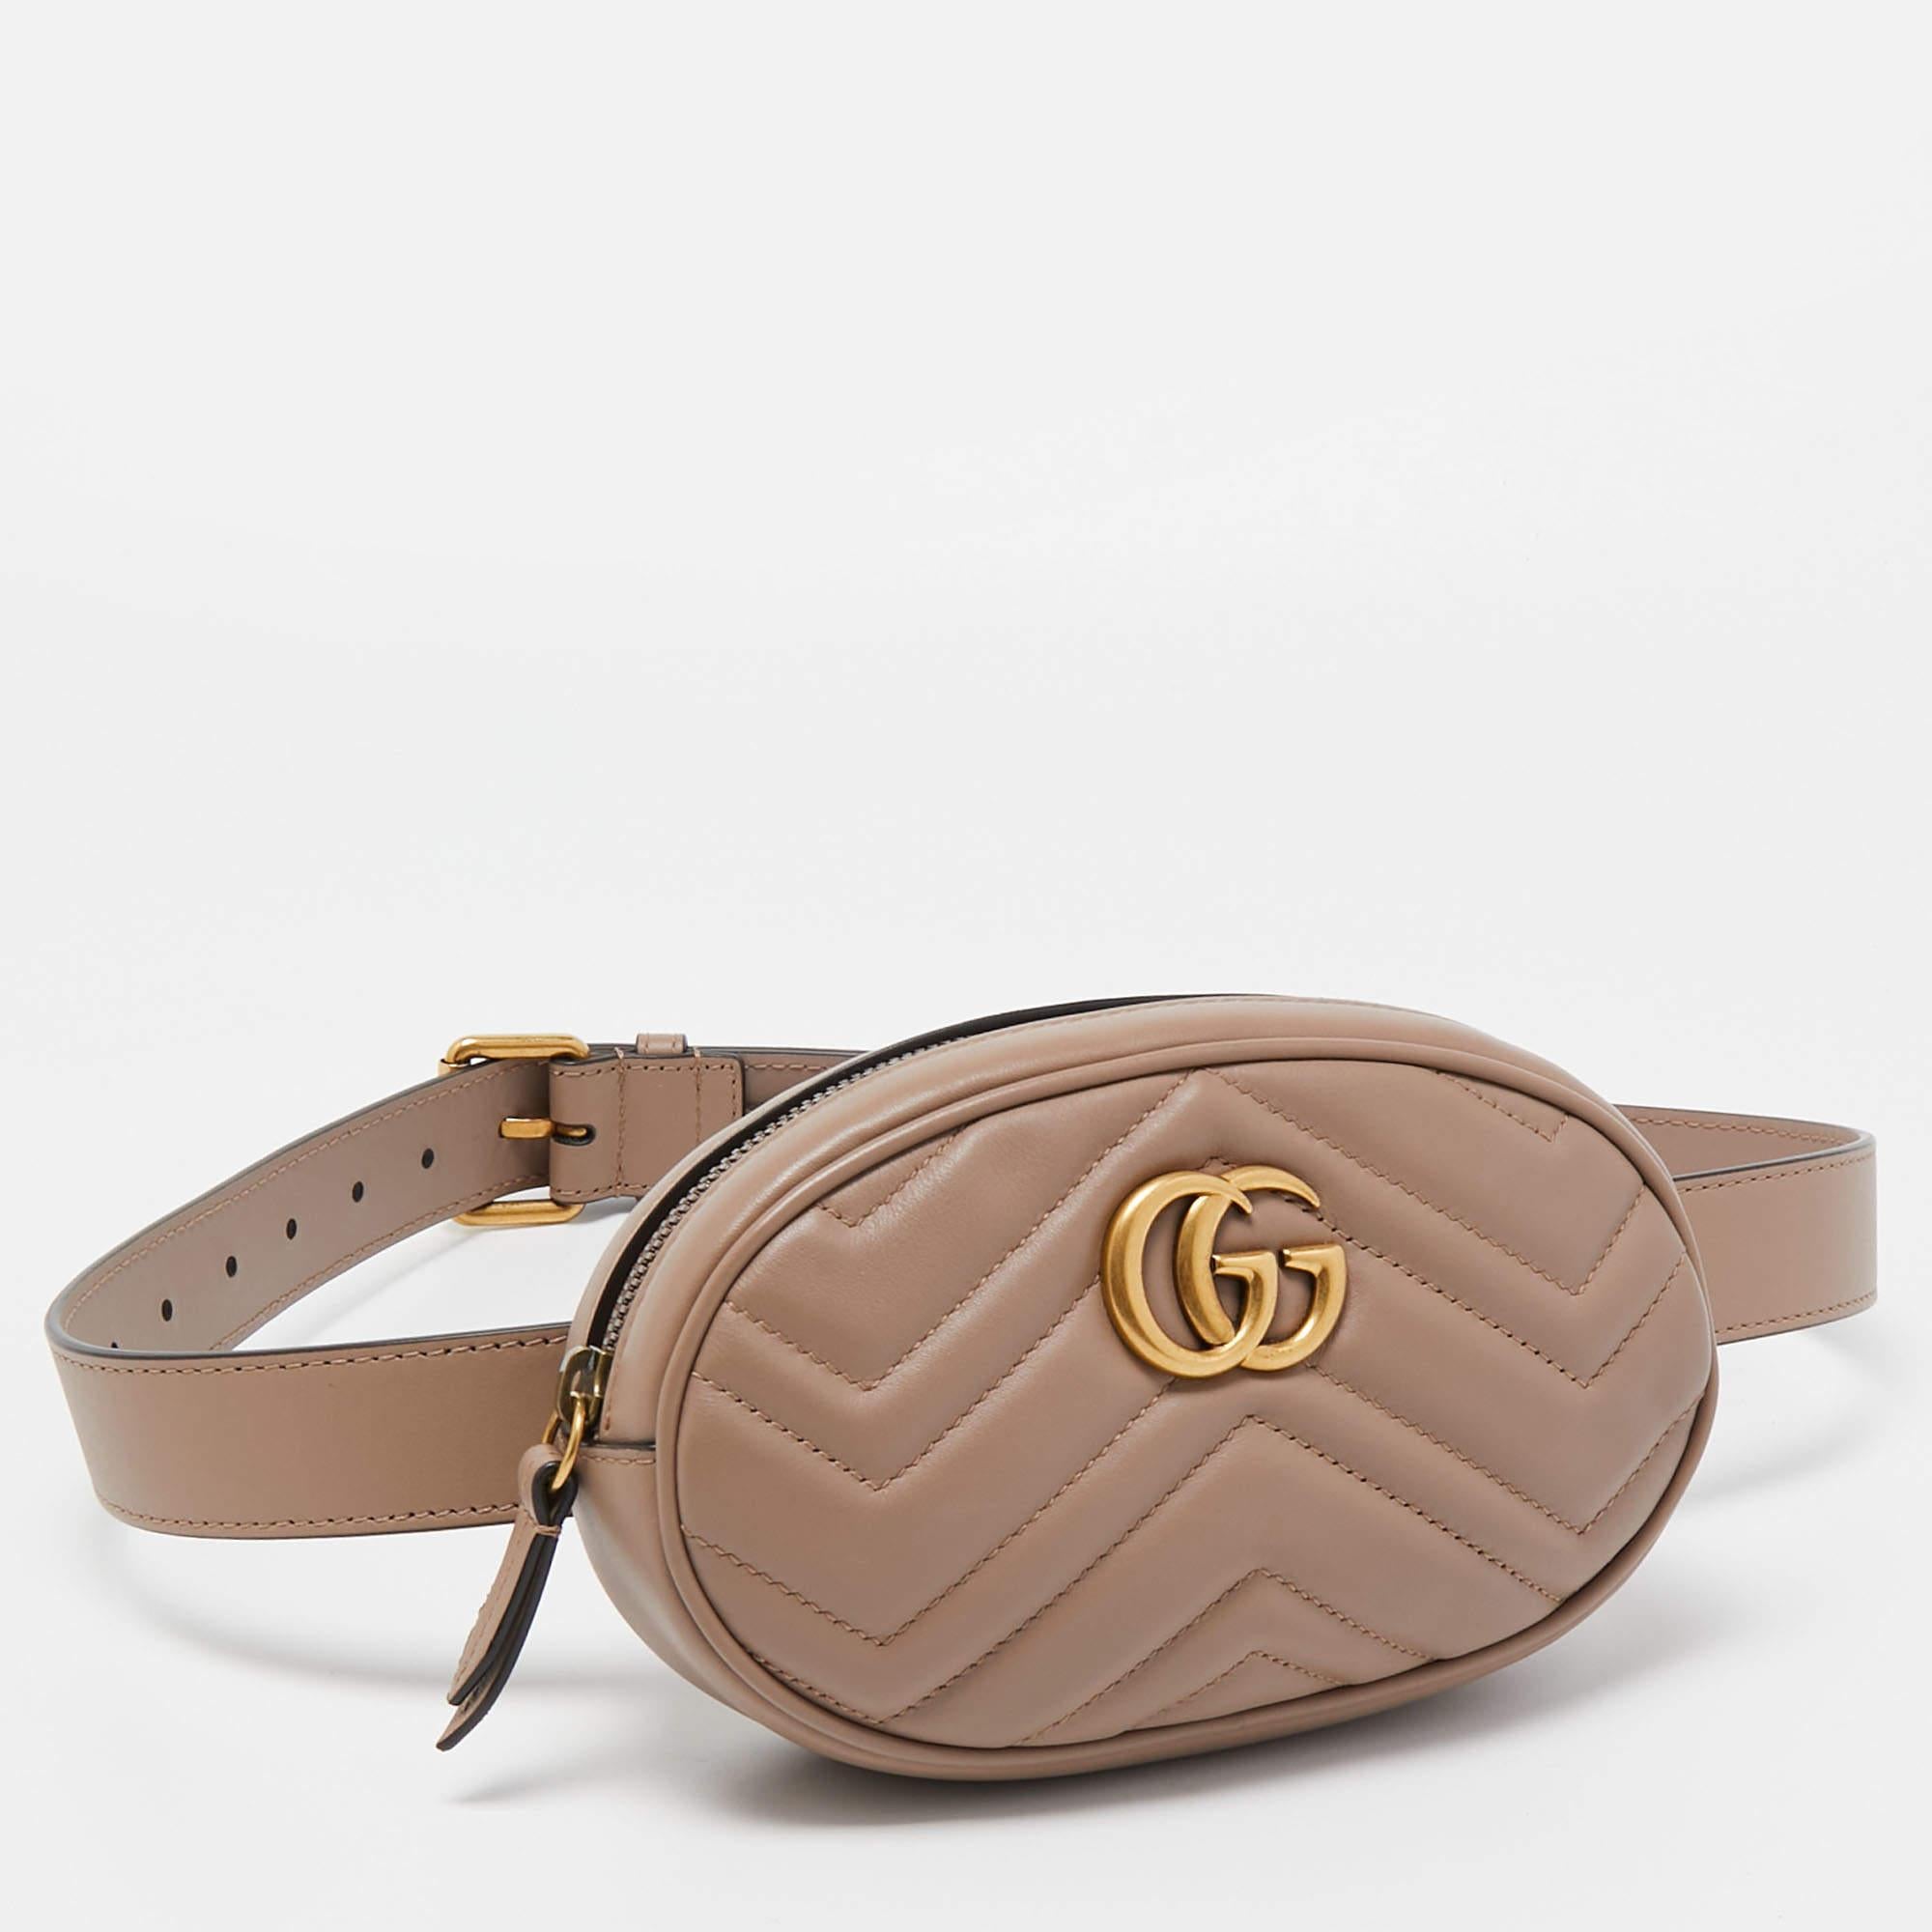 The Gucci Marmont bag has been exquisitely crafted from leather and is equipped with an Alcantara interior. On the front, there is the GG logo in gold-tone metal and the leather belt is provided for you to style the piece as a waist bag.

